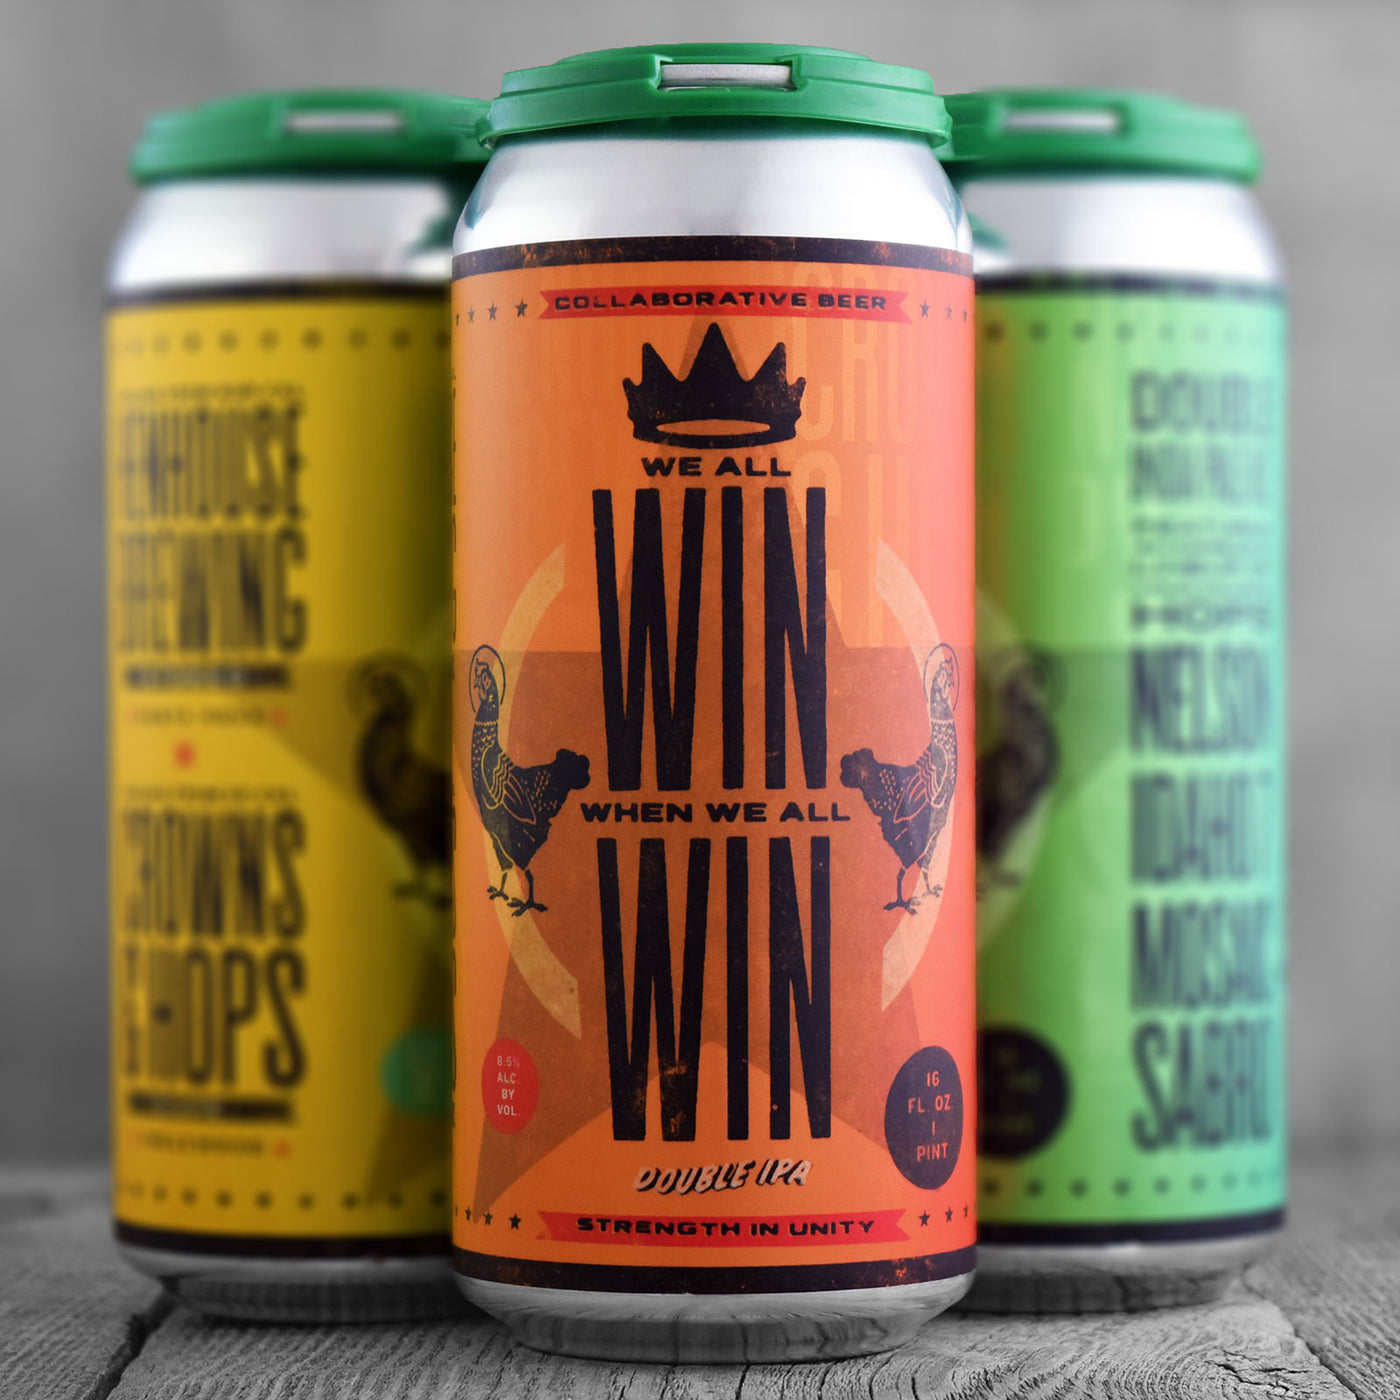 HenHouse / Crowns & Hops - We All Win When We All Win